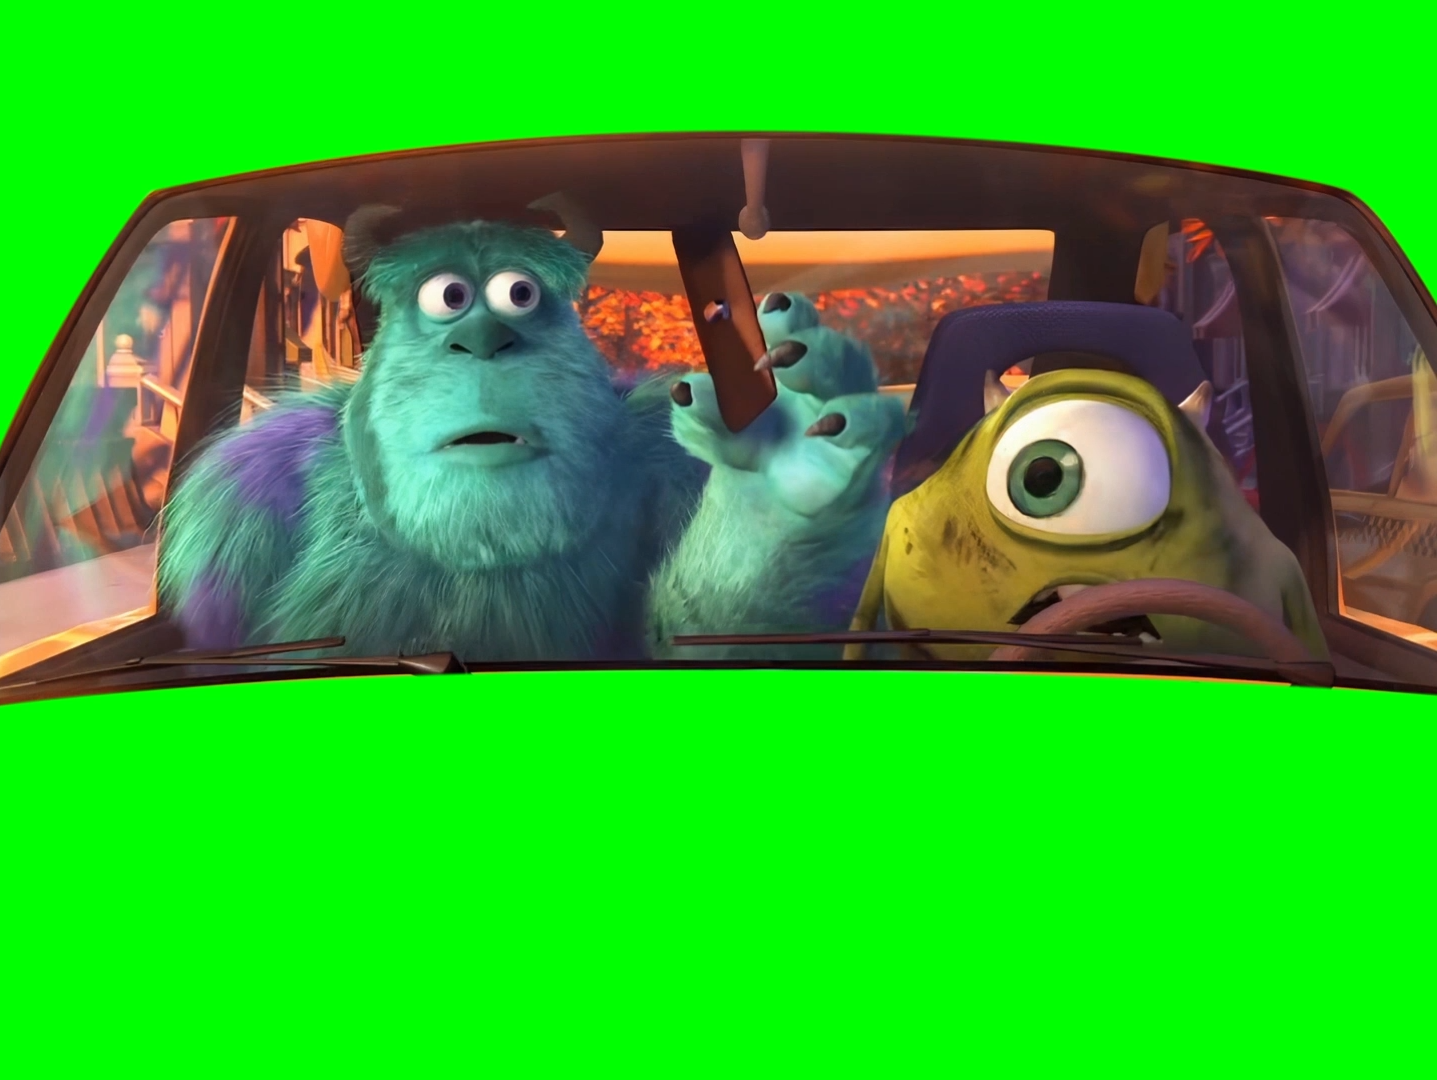 Get Out of the Car Please meme - Mike Wazowski and Sulley Monsters Inc (Green Screen)